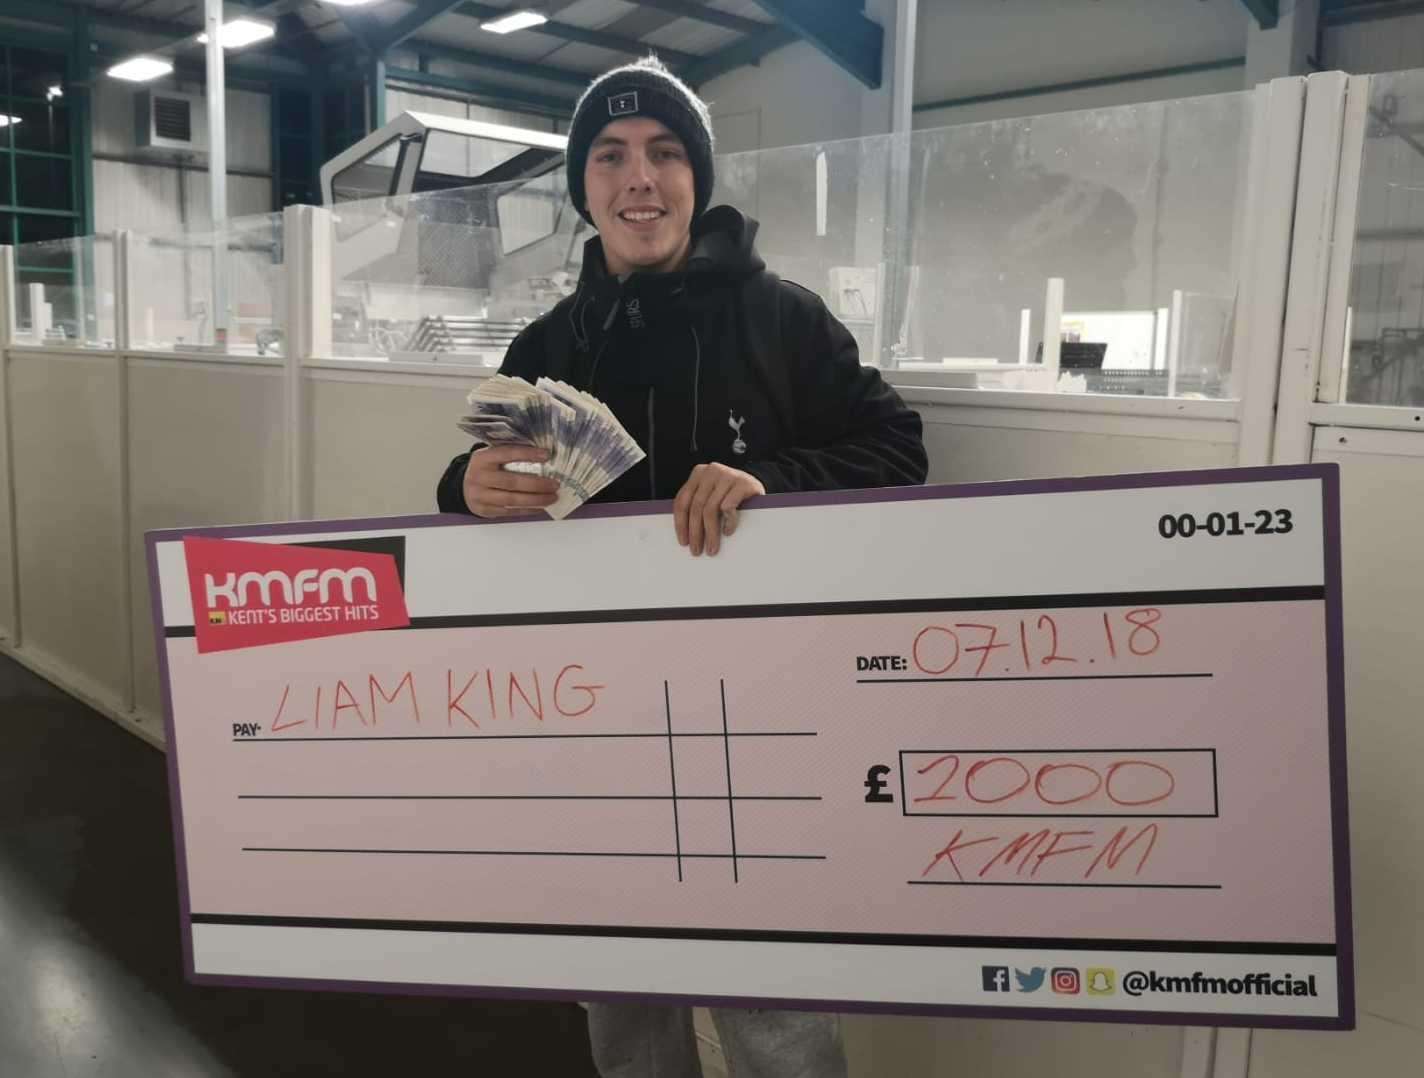 Liam King with the cash